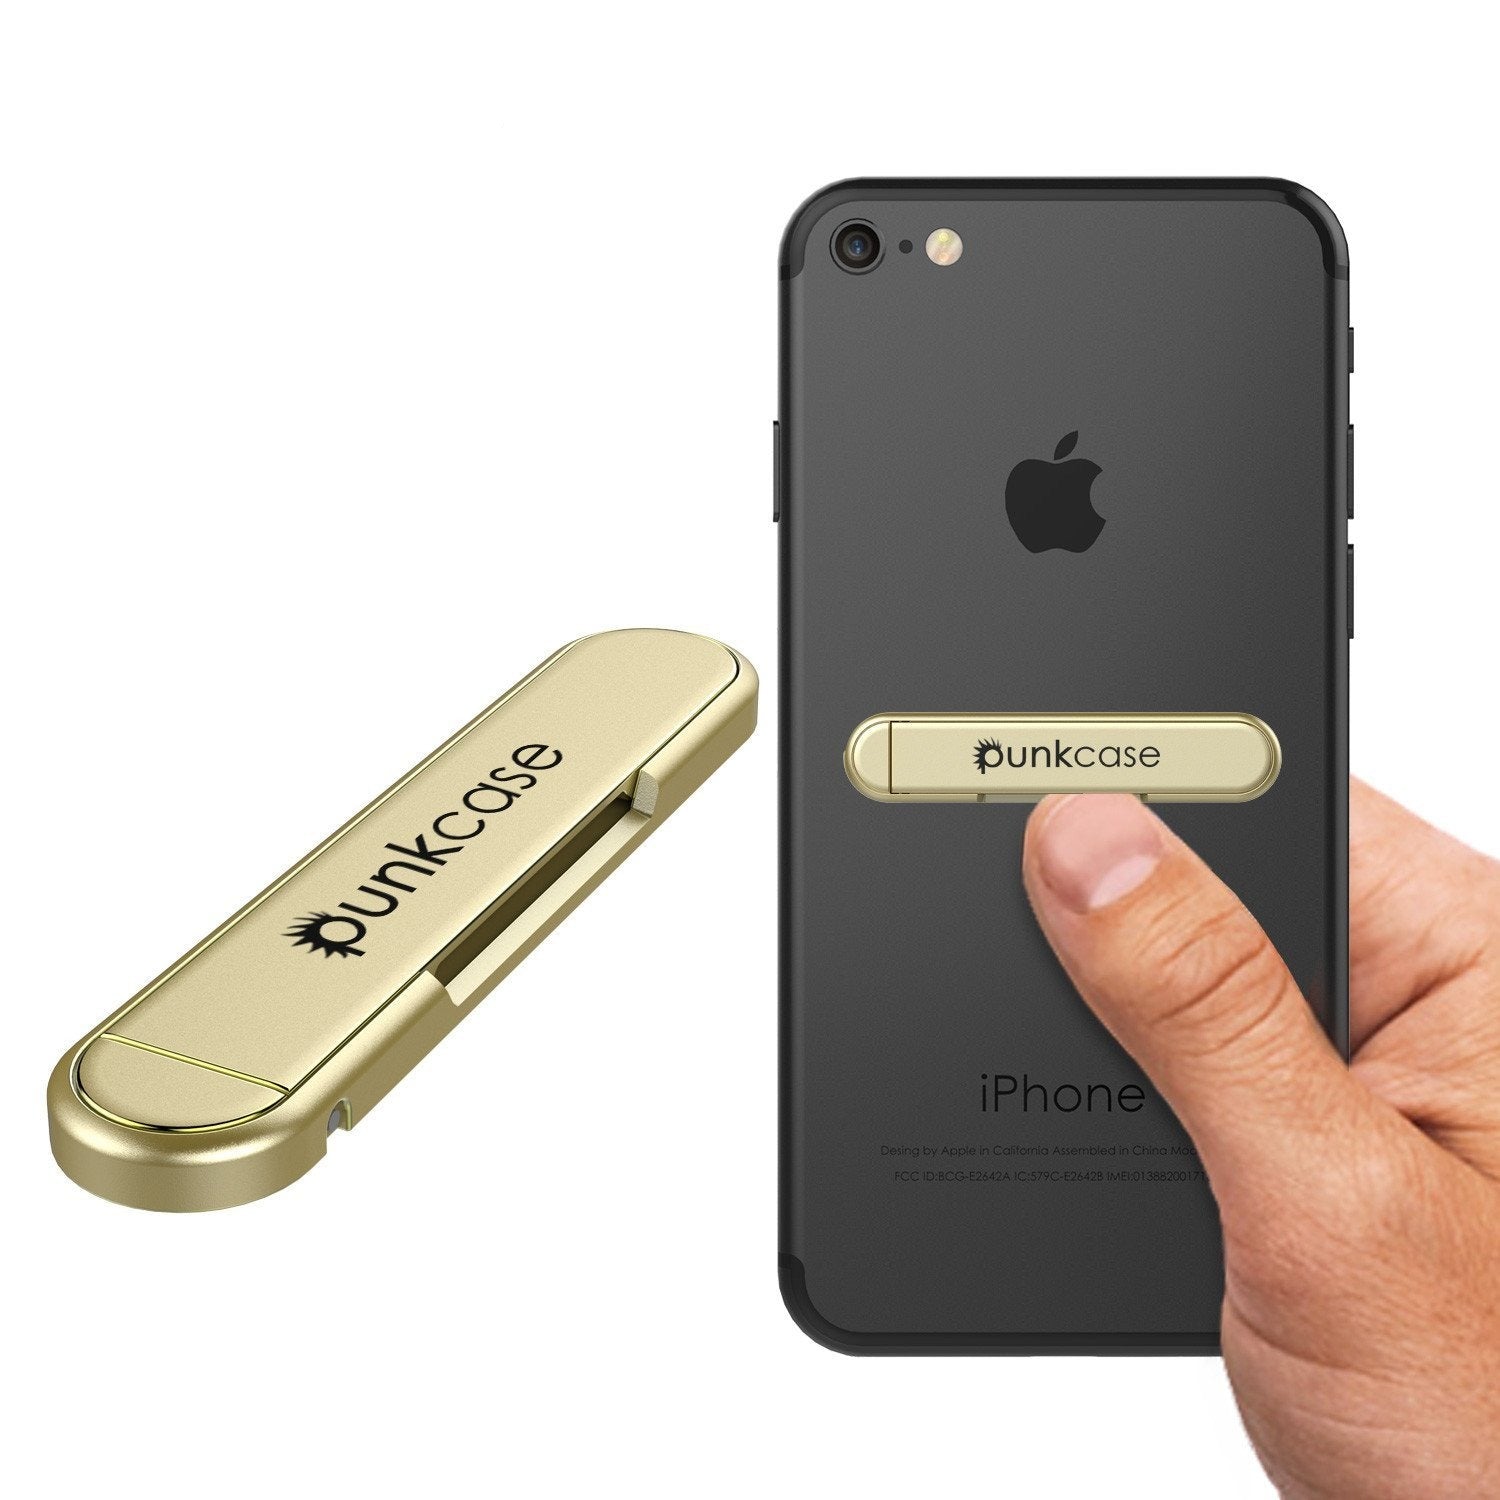 PUNKCASE FlickStick Universal Cell Phone Kickstand for all Mobile Phones & Cases with Flat Backs, One Finger Operation (Gold)